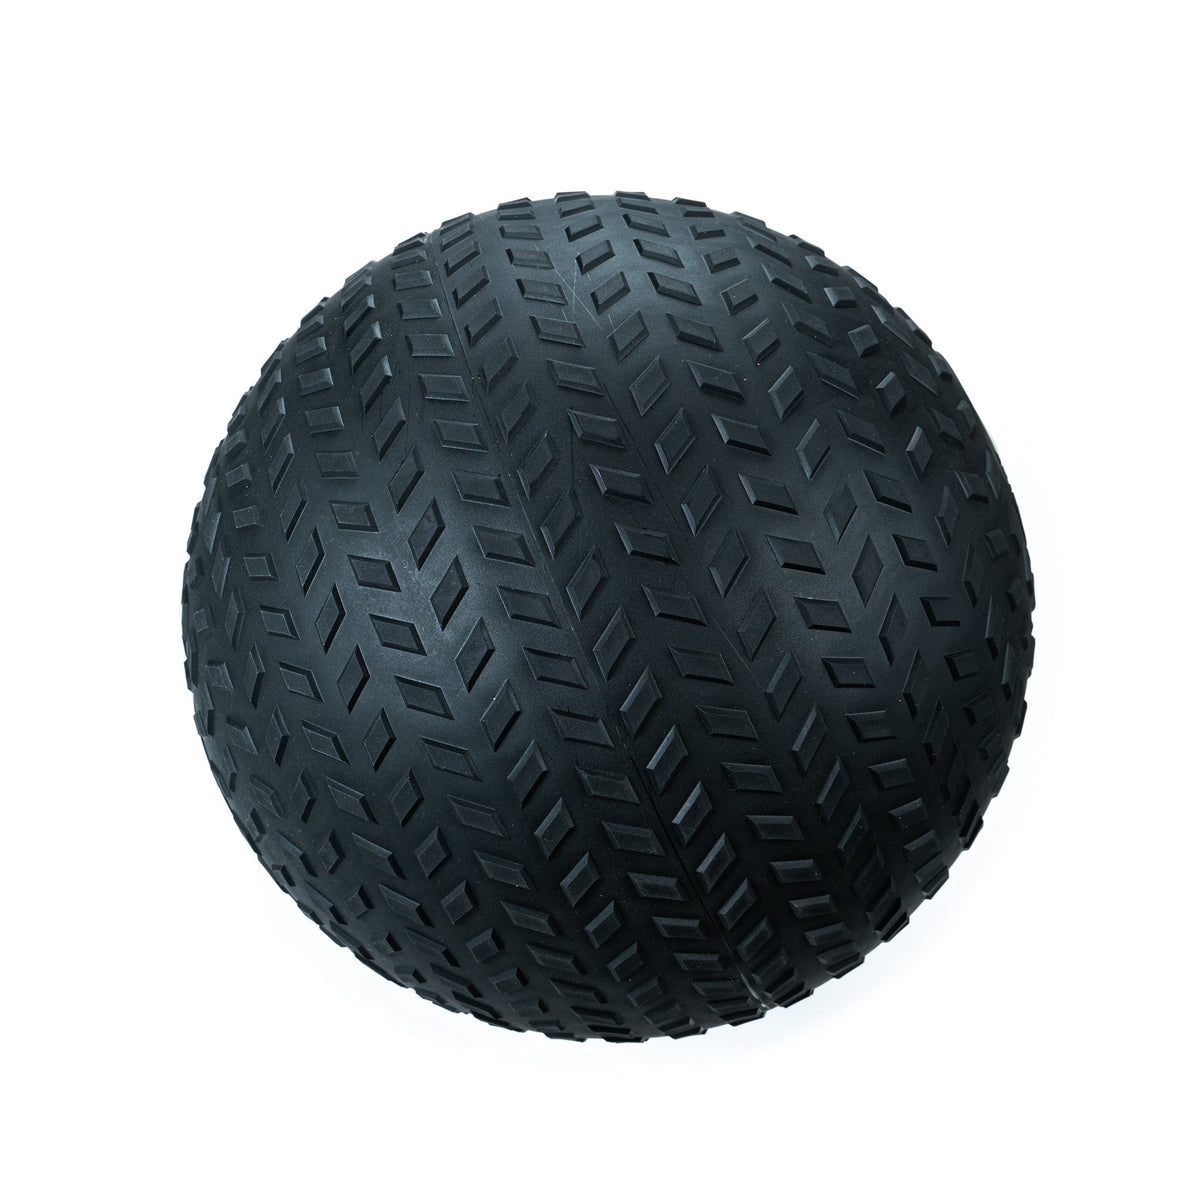 FitWay Equip. Max Grip Slam Ball - 10 Lbs - Fitness Experience